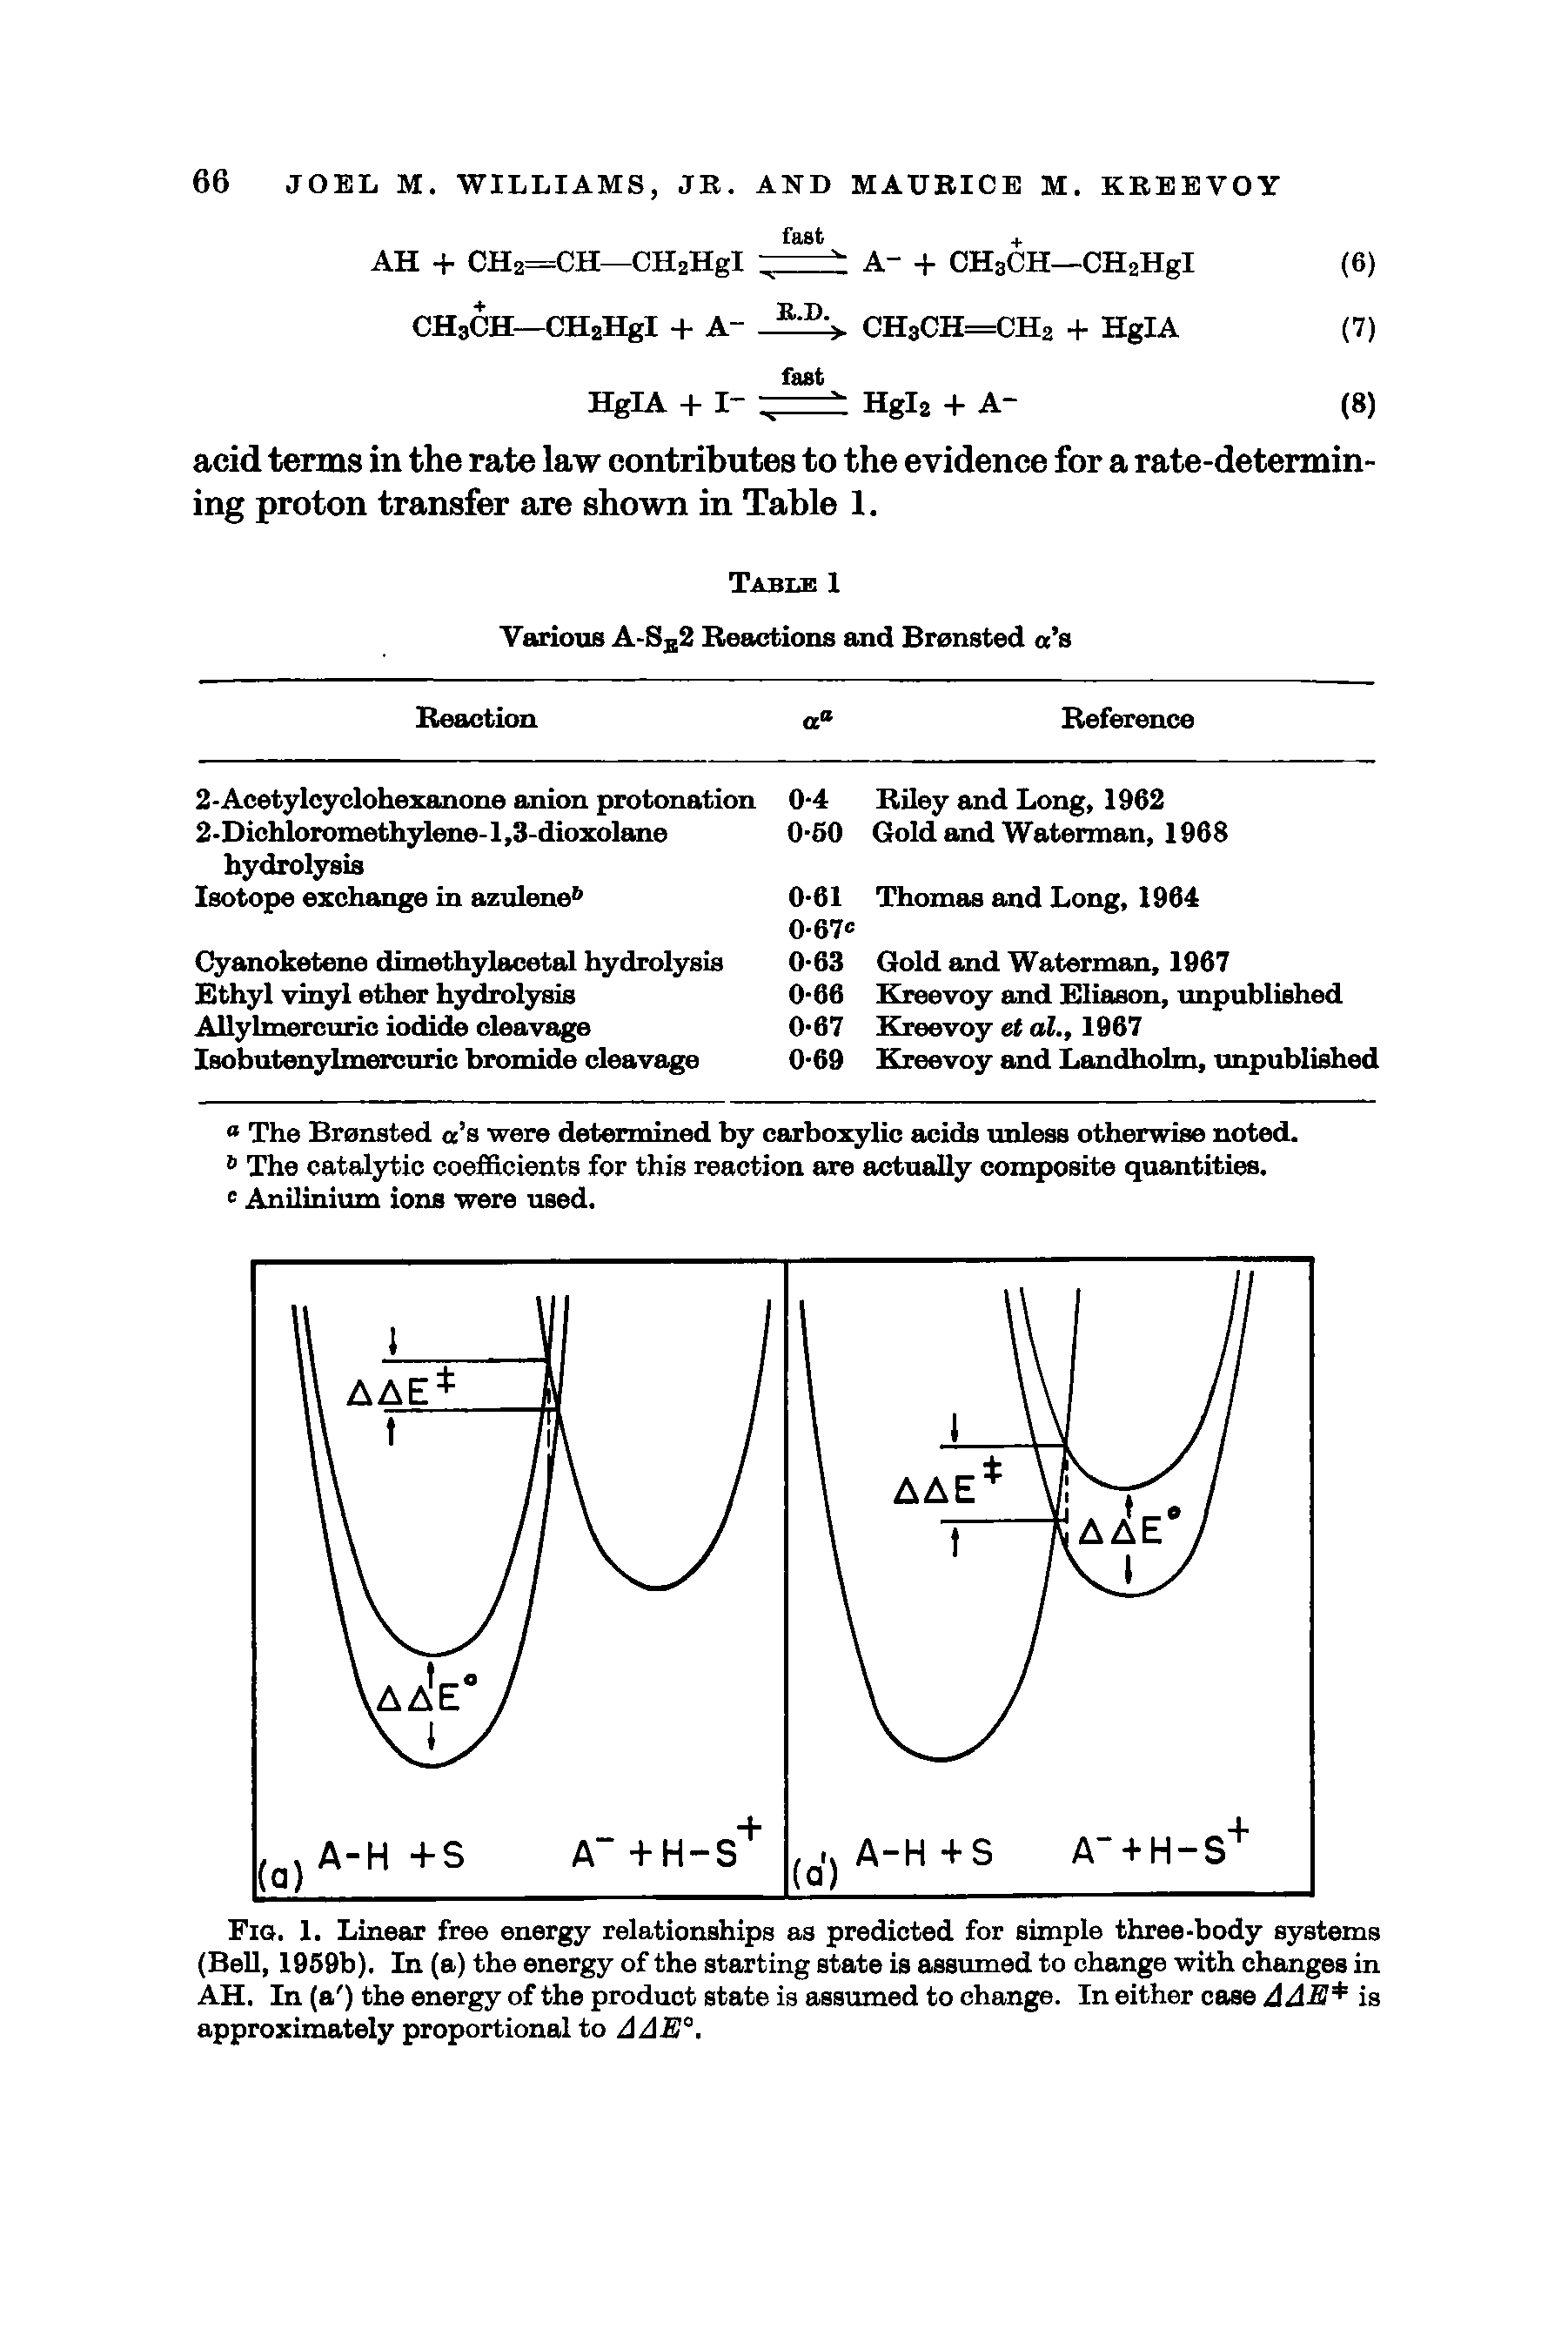 Fig. 1. Linear free energy relationships as predicted for simple three-body systems (Bell, 1959b). In (a) the energy of the starting state is assumed to change with changes in AH. In (a ) the energy of the product state is assumed to change. In either case AAE is approximately proportional to AAE°.